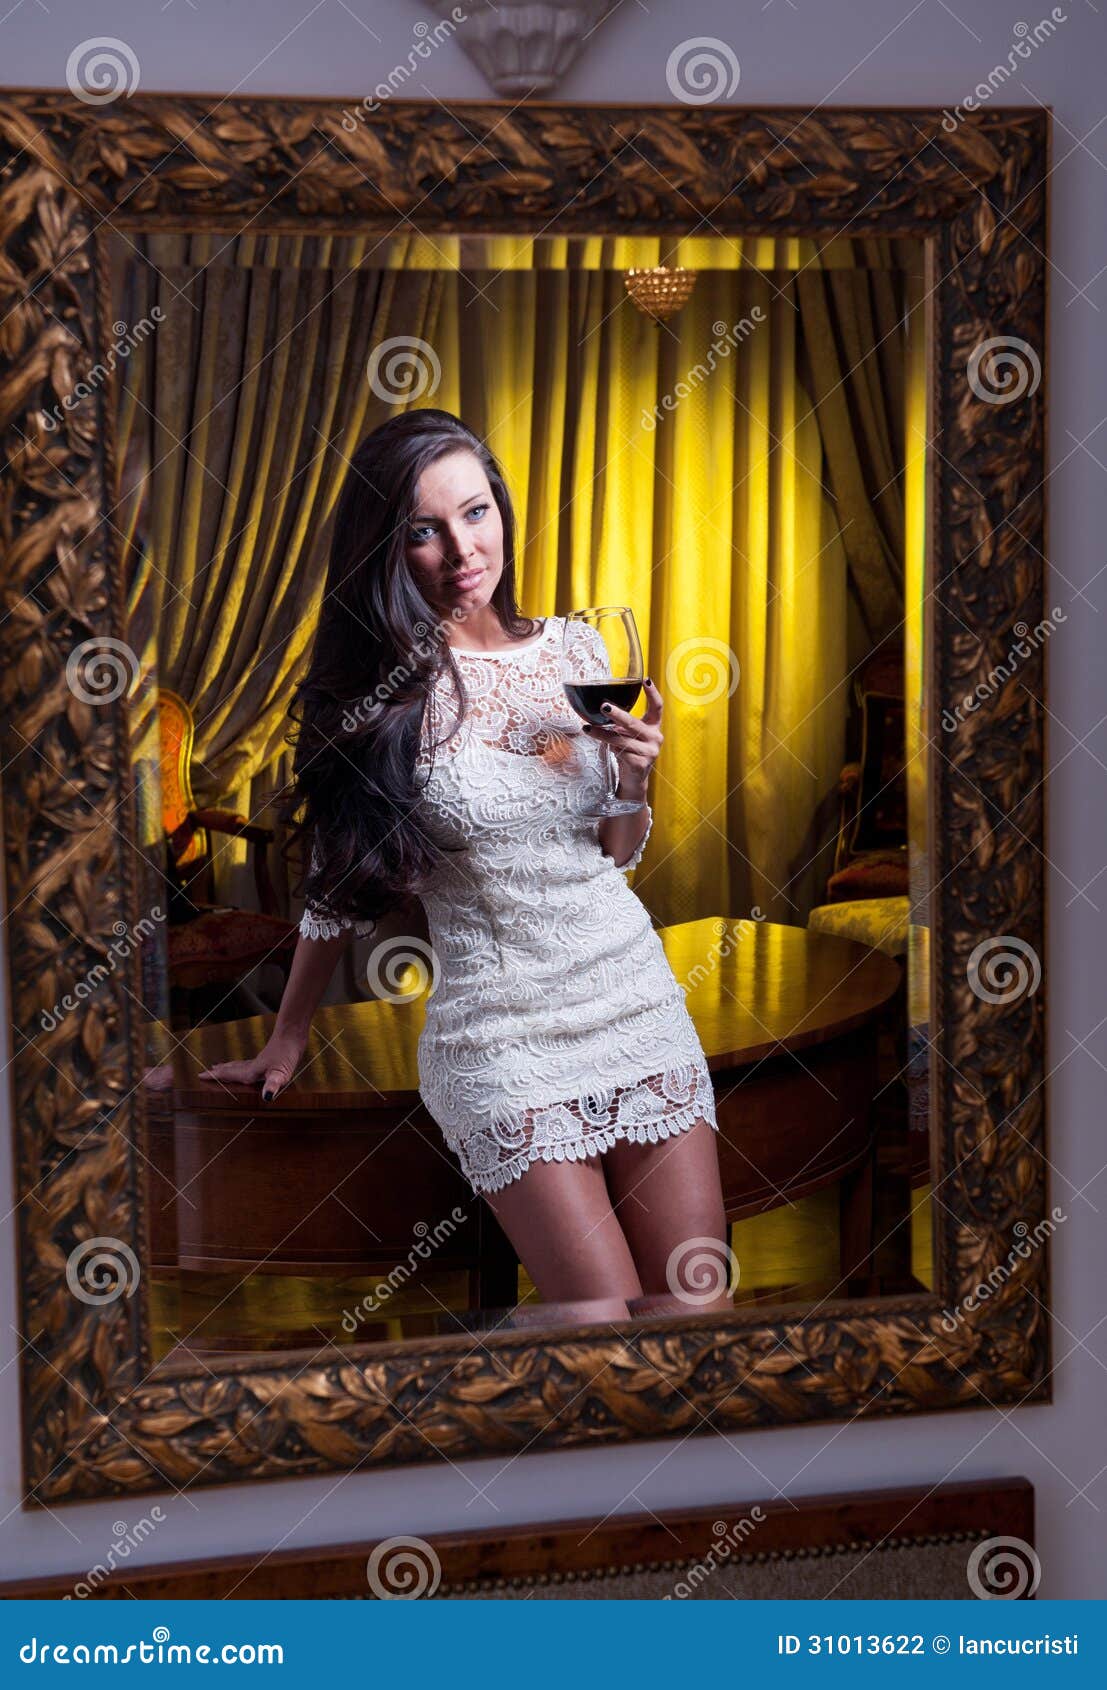 The Beautiful Girl In A Short White Dress Looking Into 